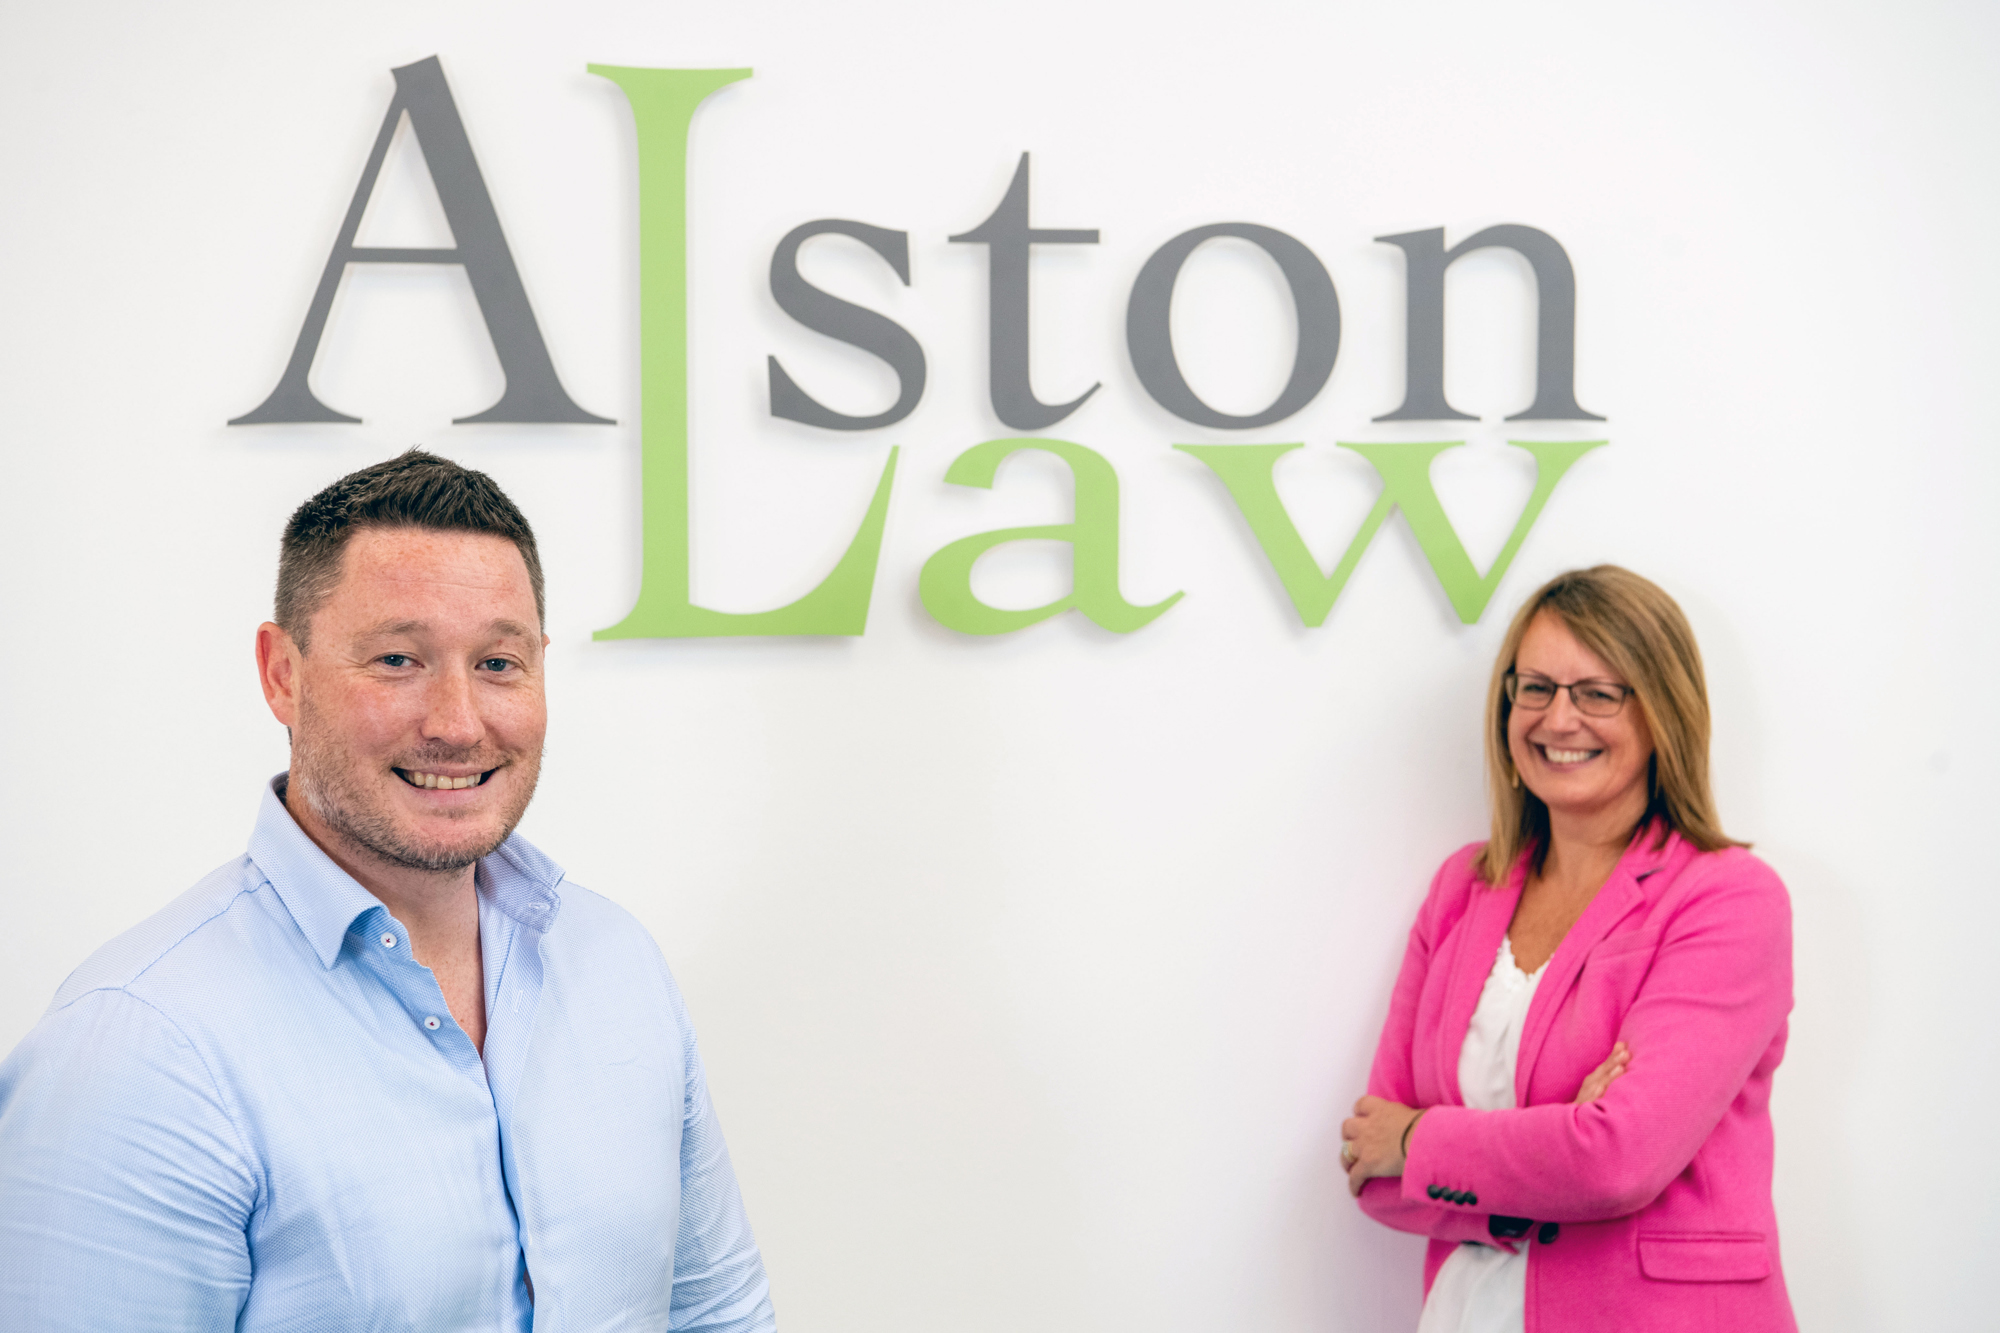 Simpson & Marwick expands thanks to Alston Law merger